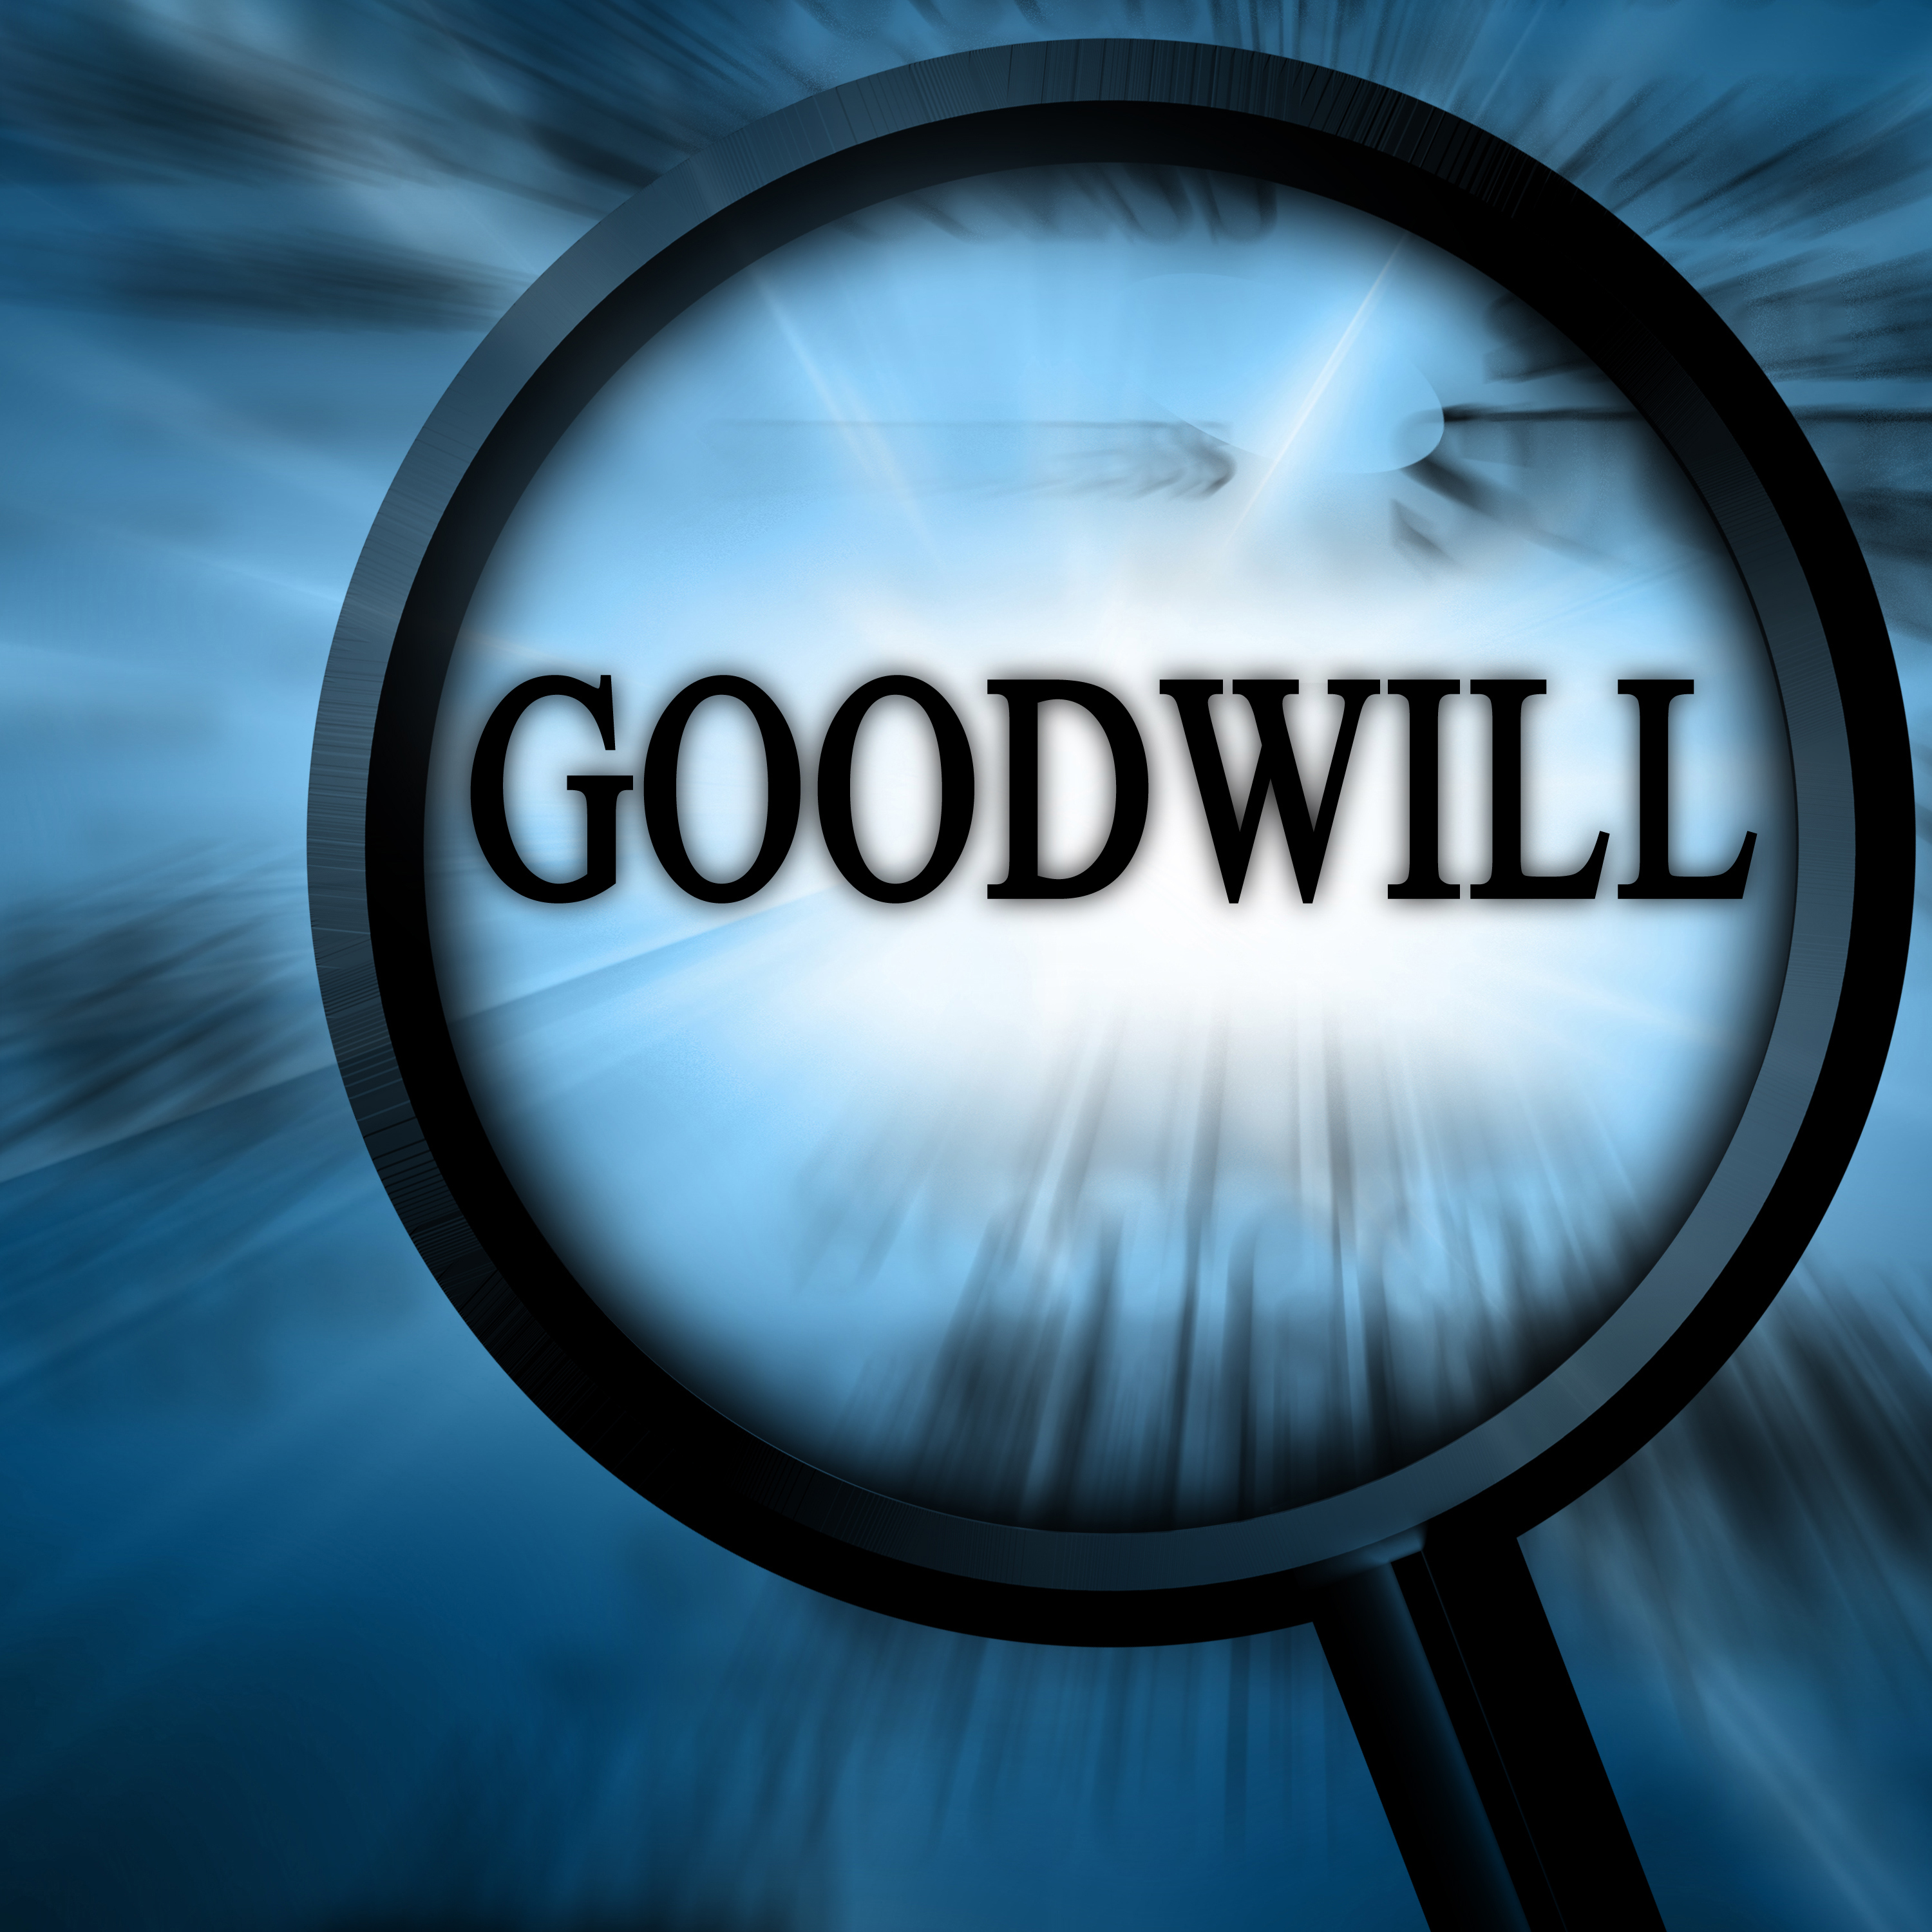 goodwill on a blue background with a magnifier